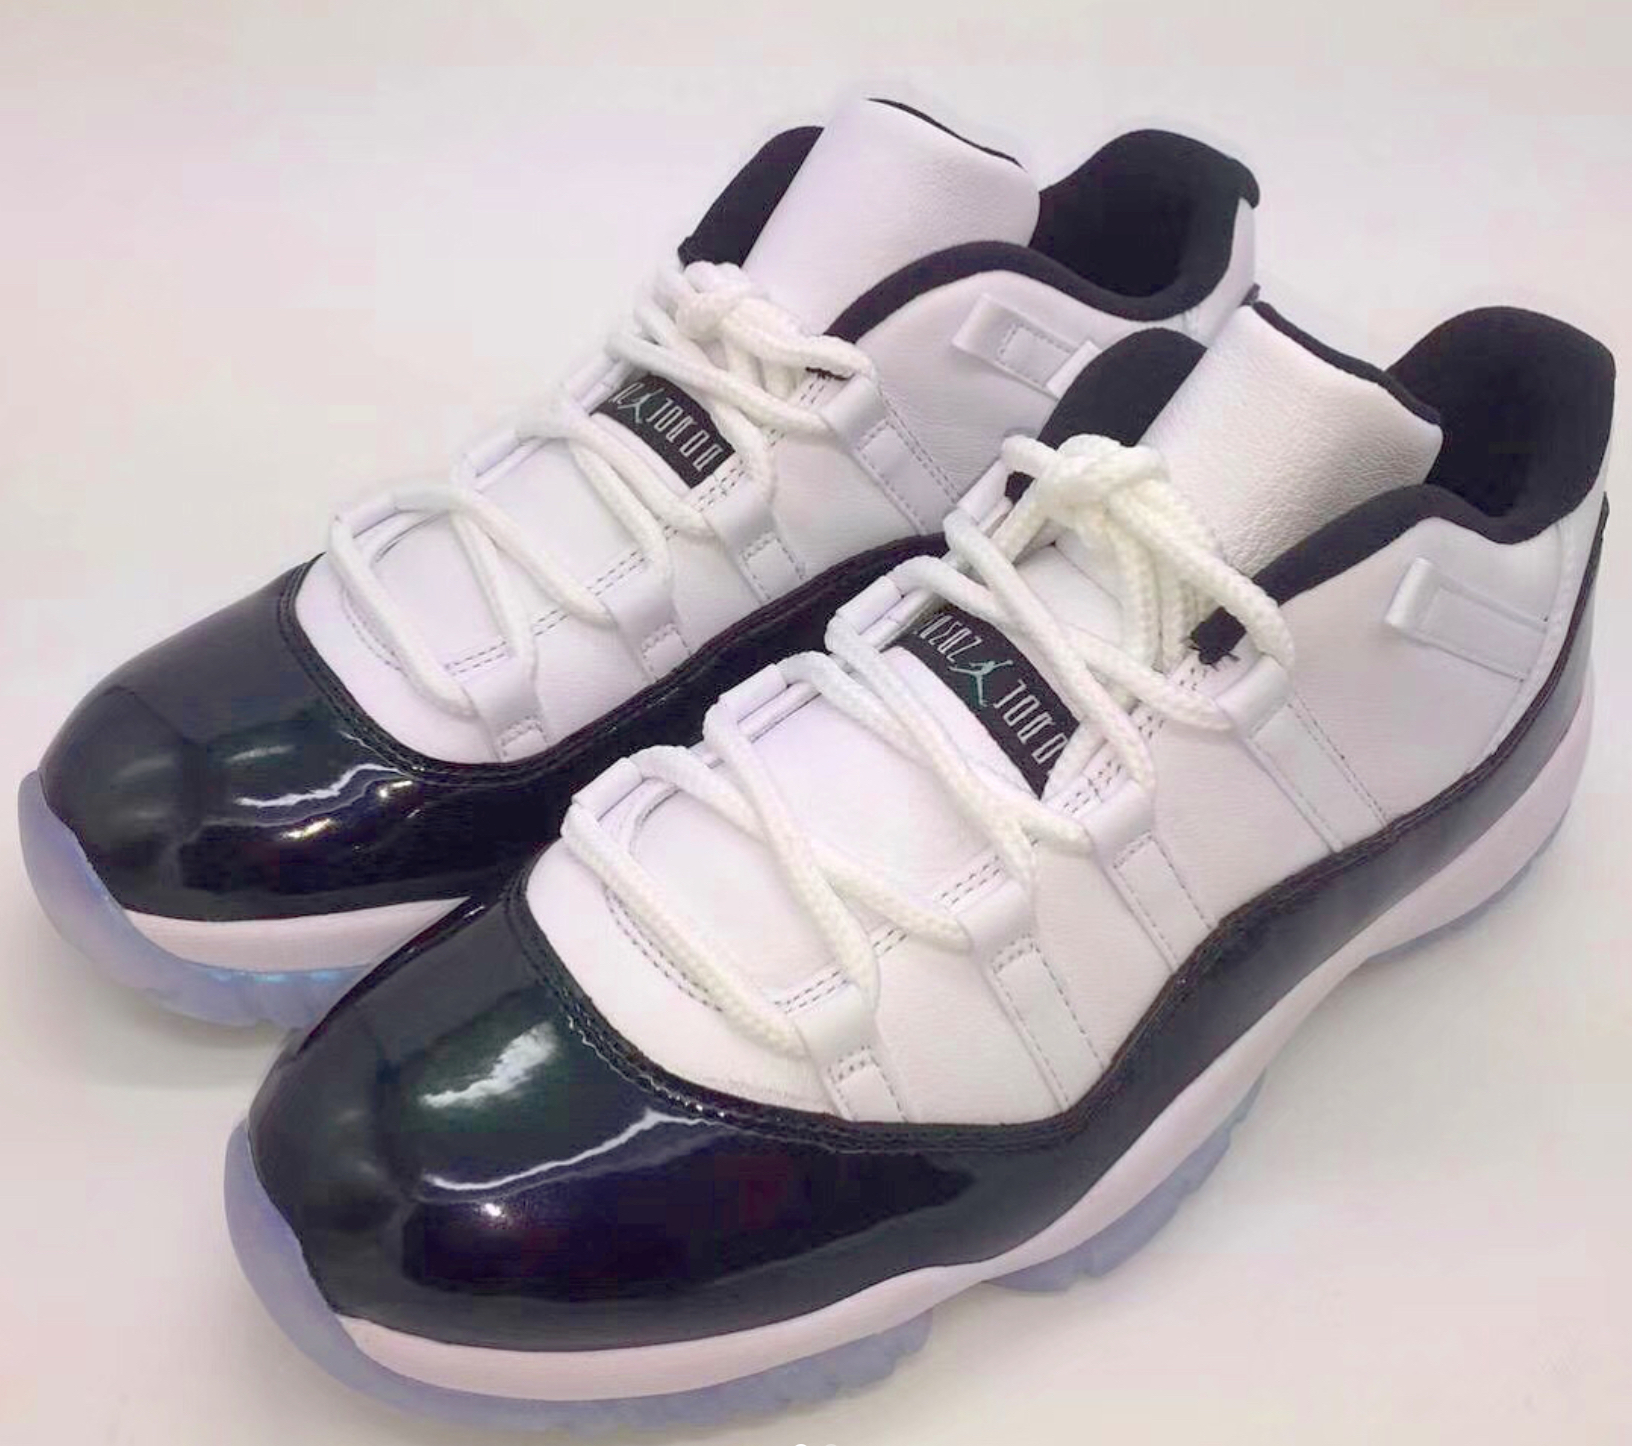 The Air Jordan 11 Low 'Easter' Will Drop for April Fools' Day WearTesters